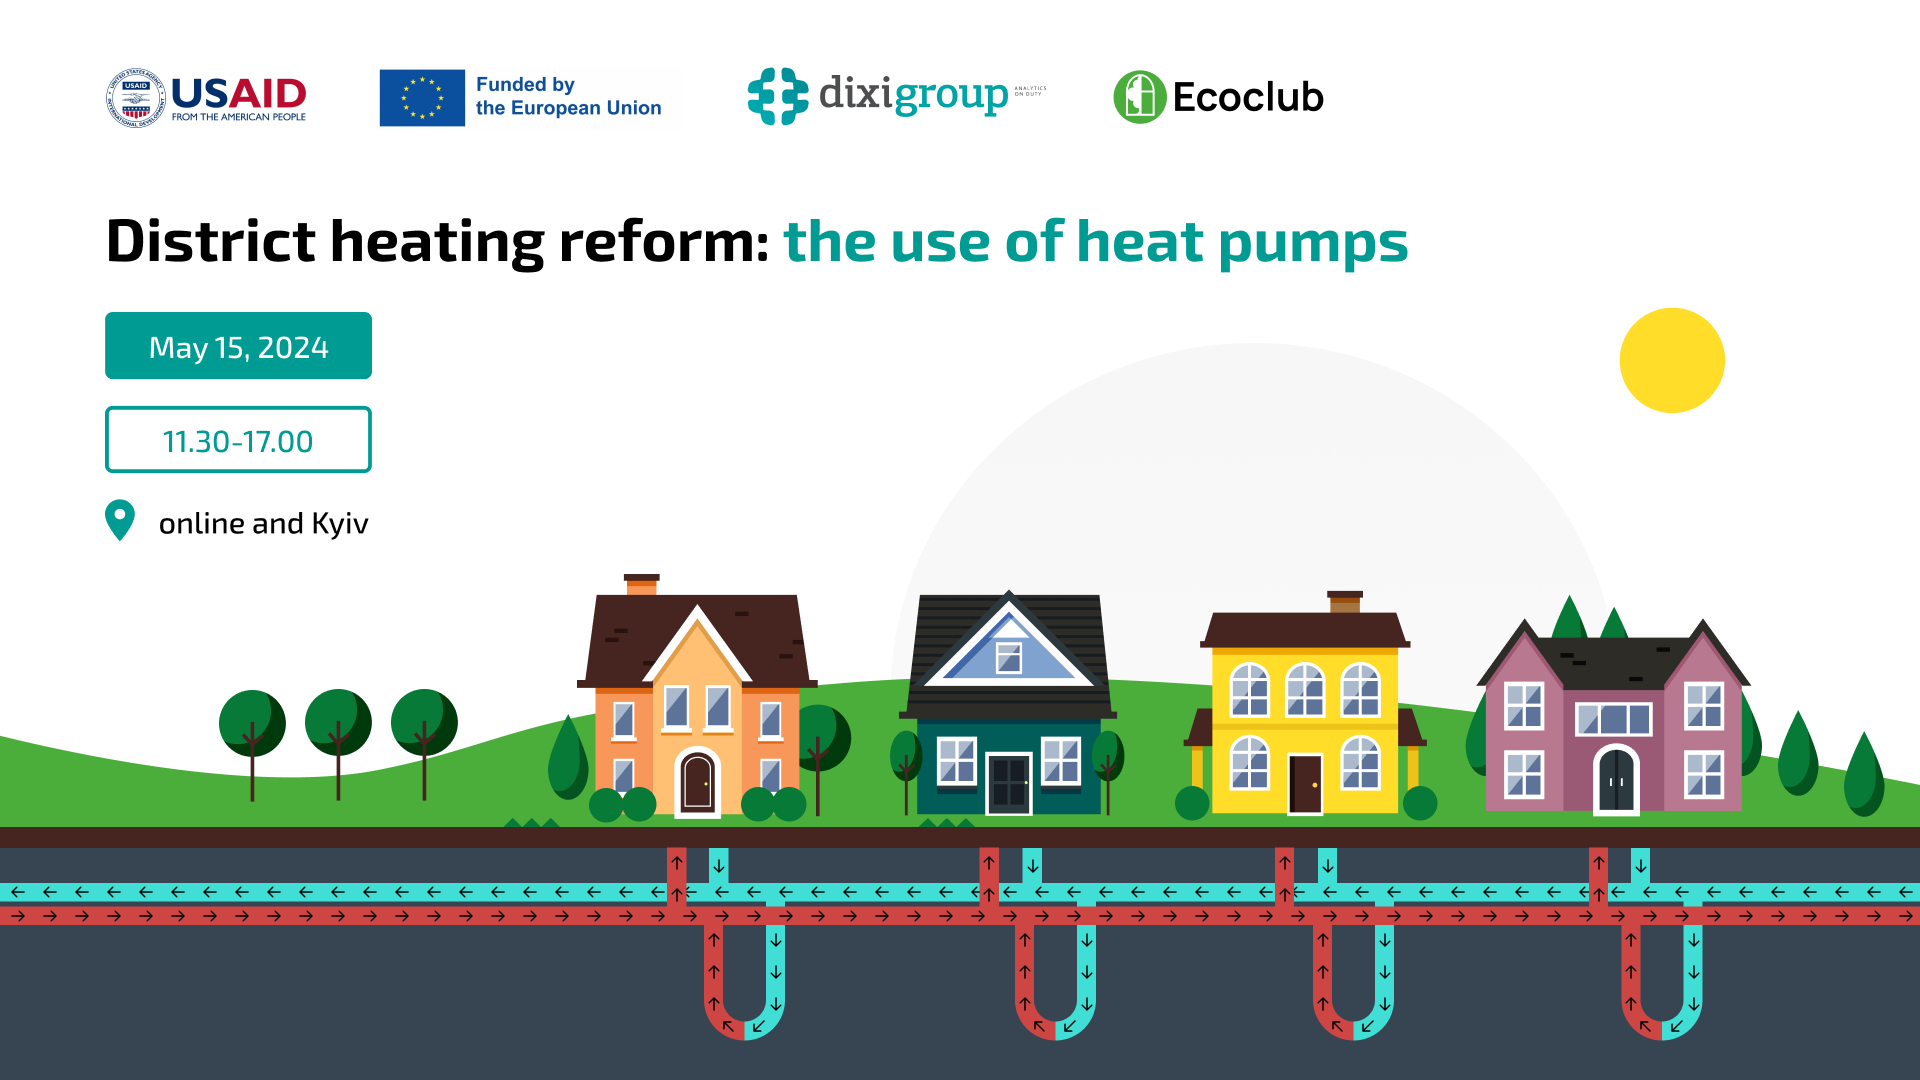 District heating reform: the use of heat pumps